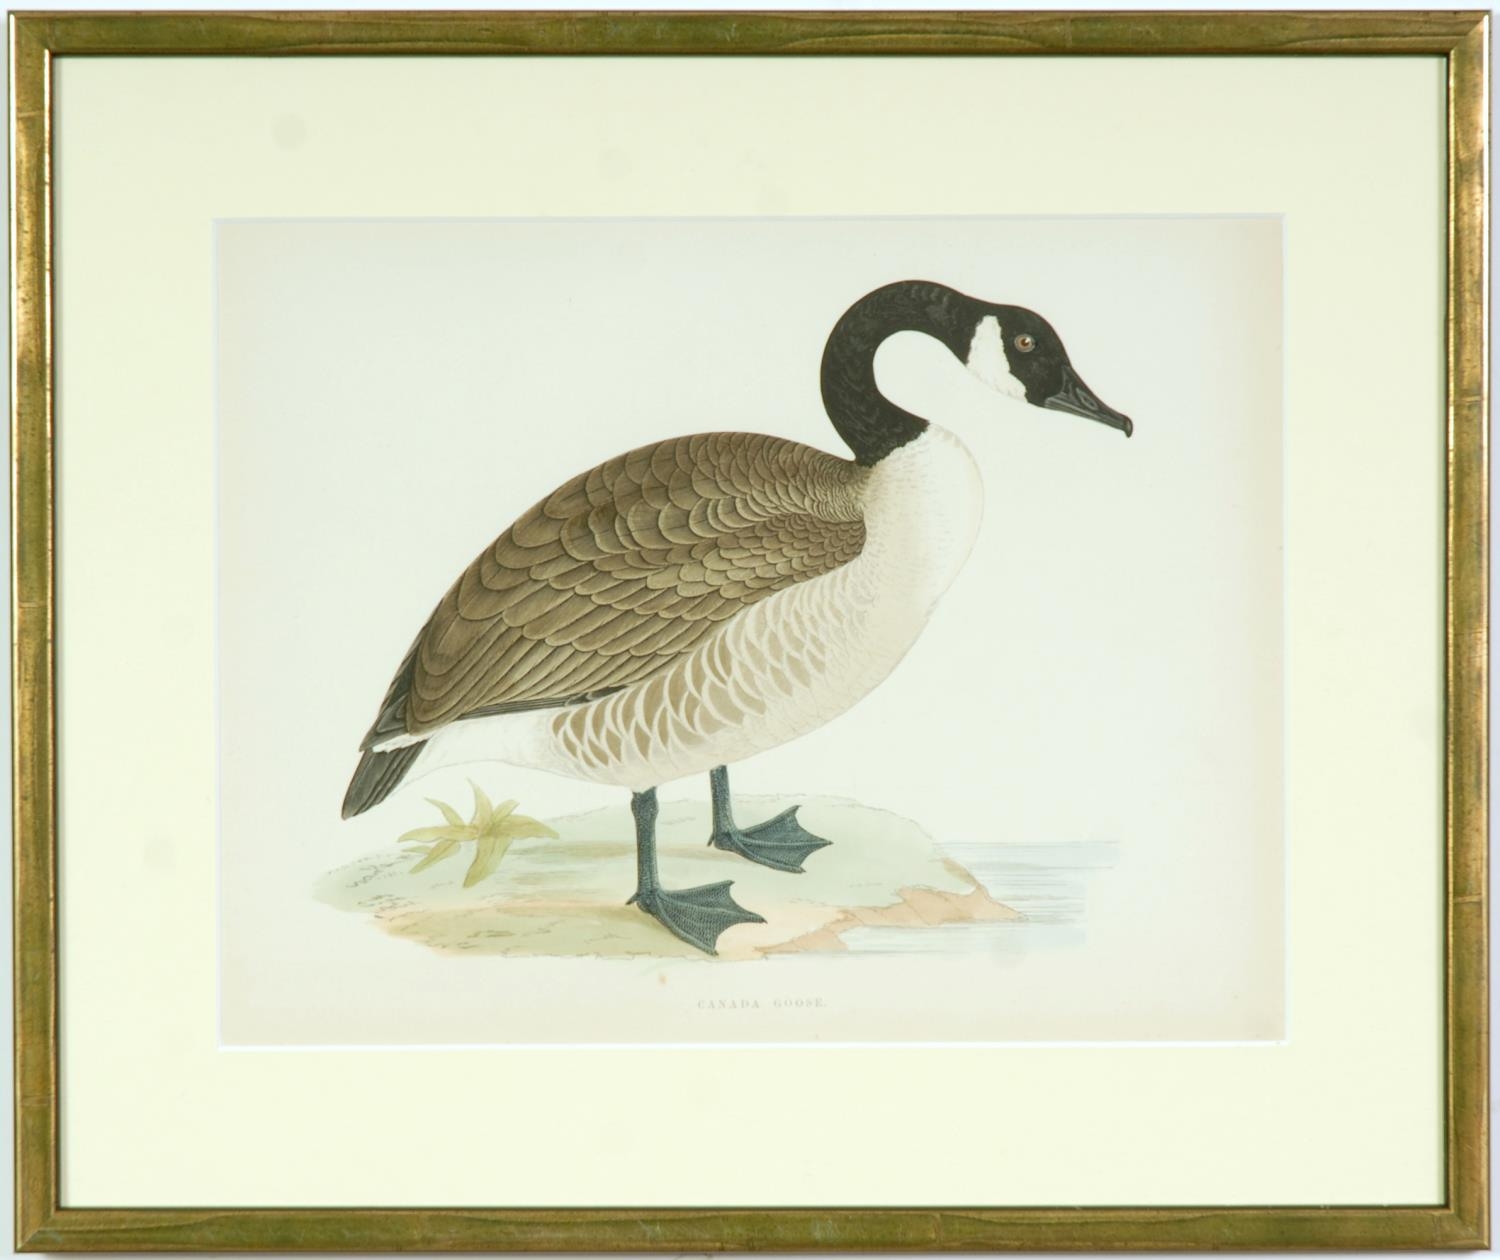 A SET OF FOUR BRITISH GAME BIRDS, swans and geese, handcoloured lithographic plates 1891, Ref: - Image 4 of 5